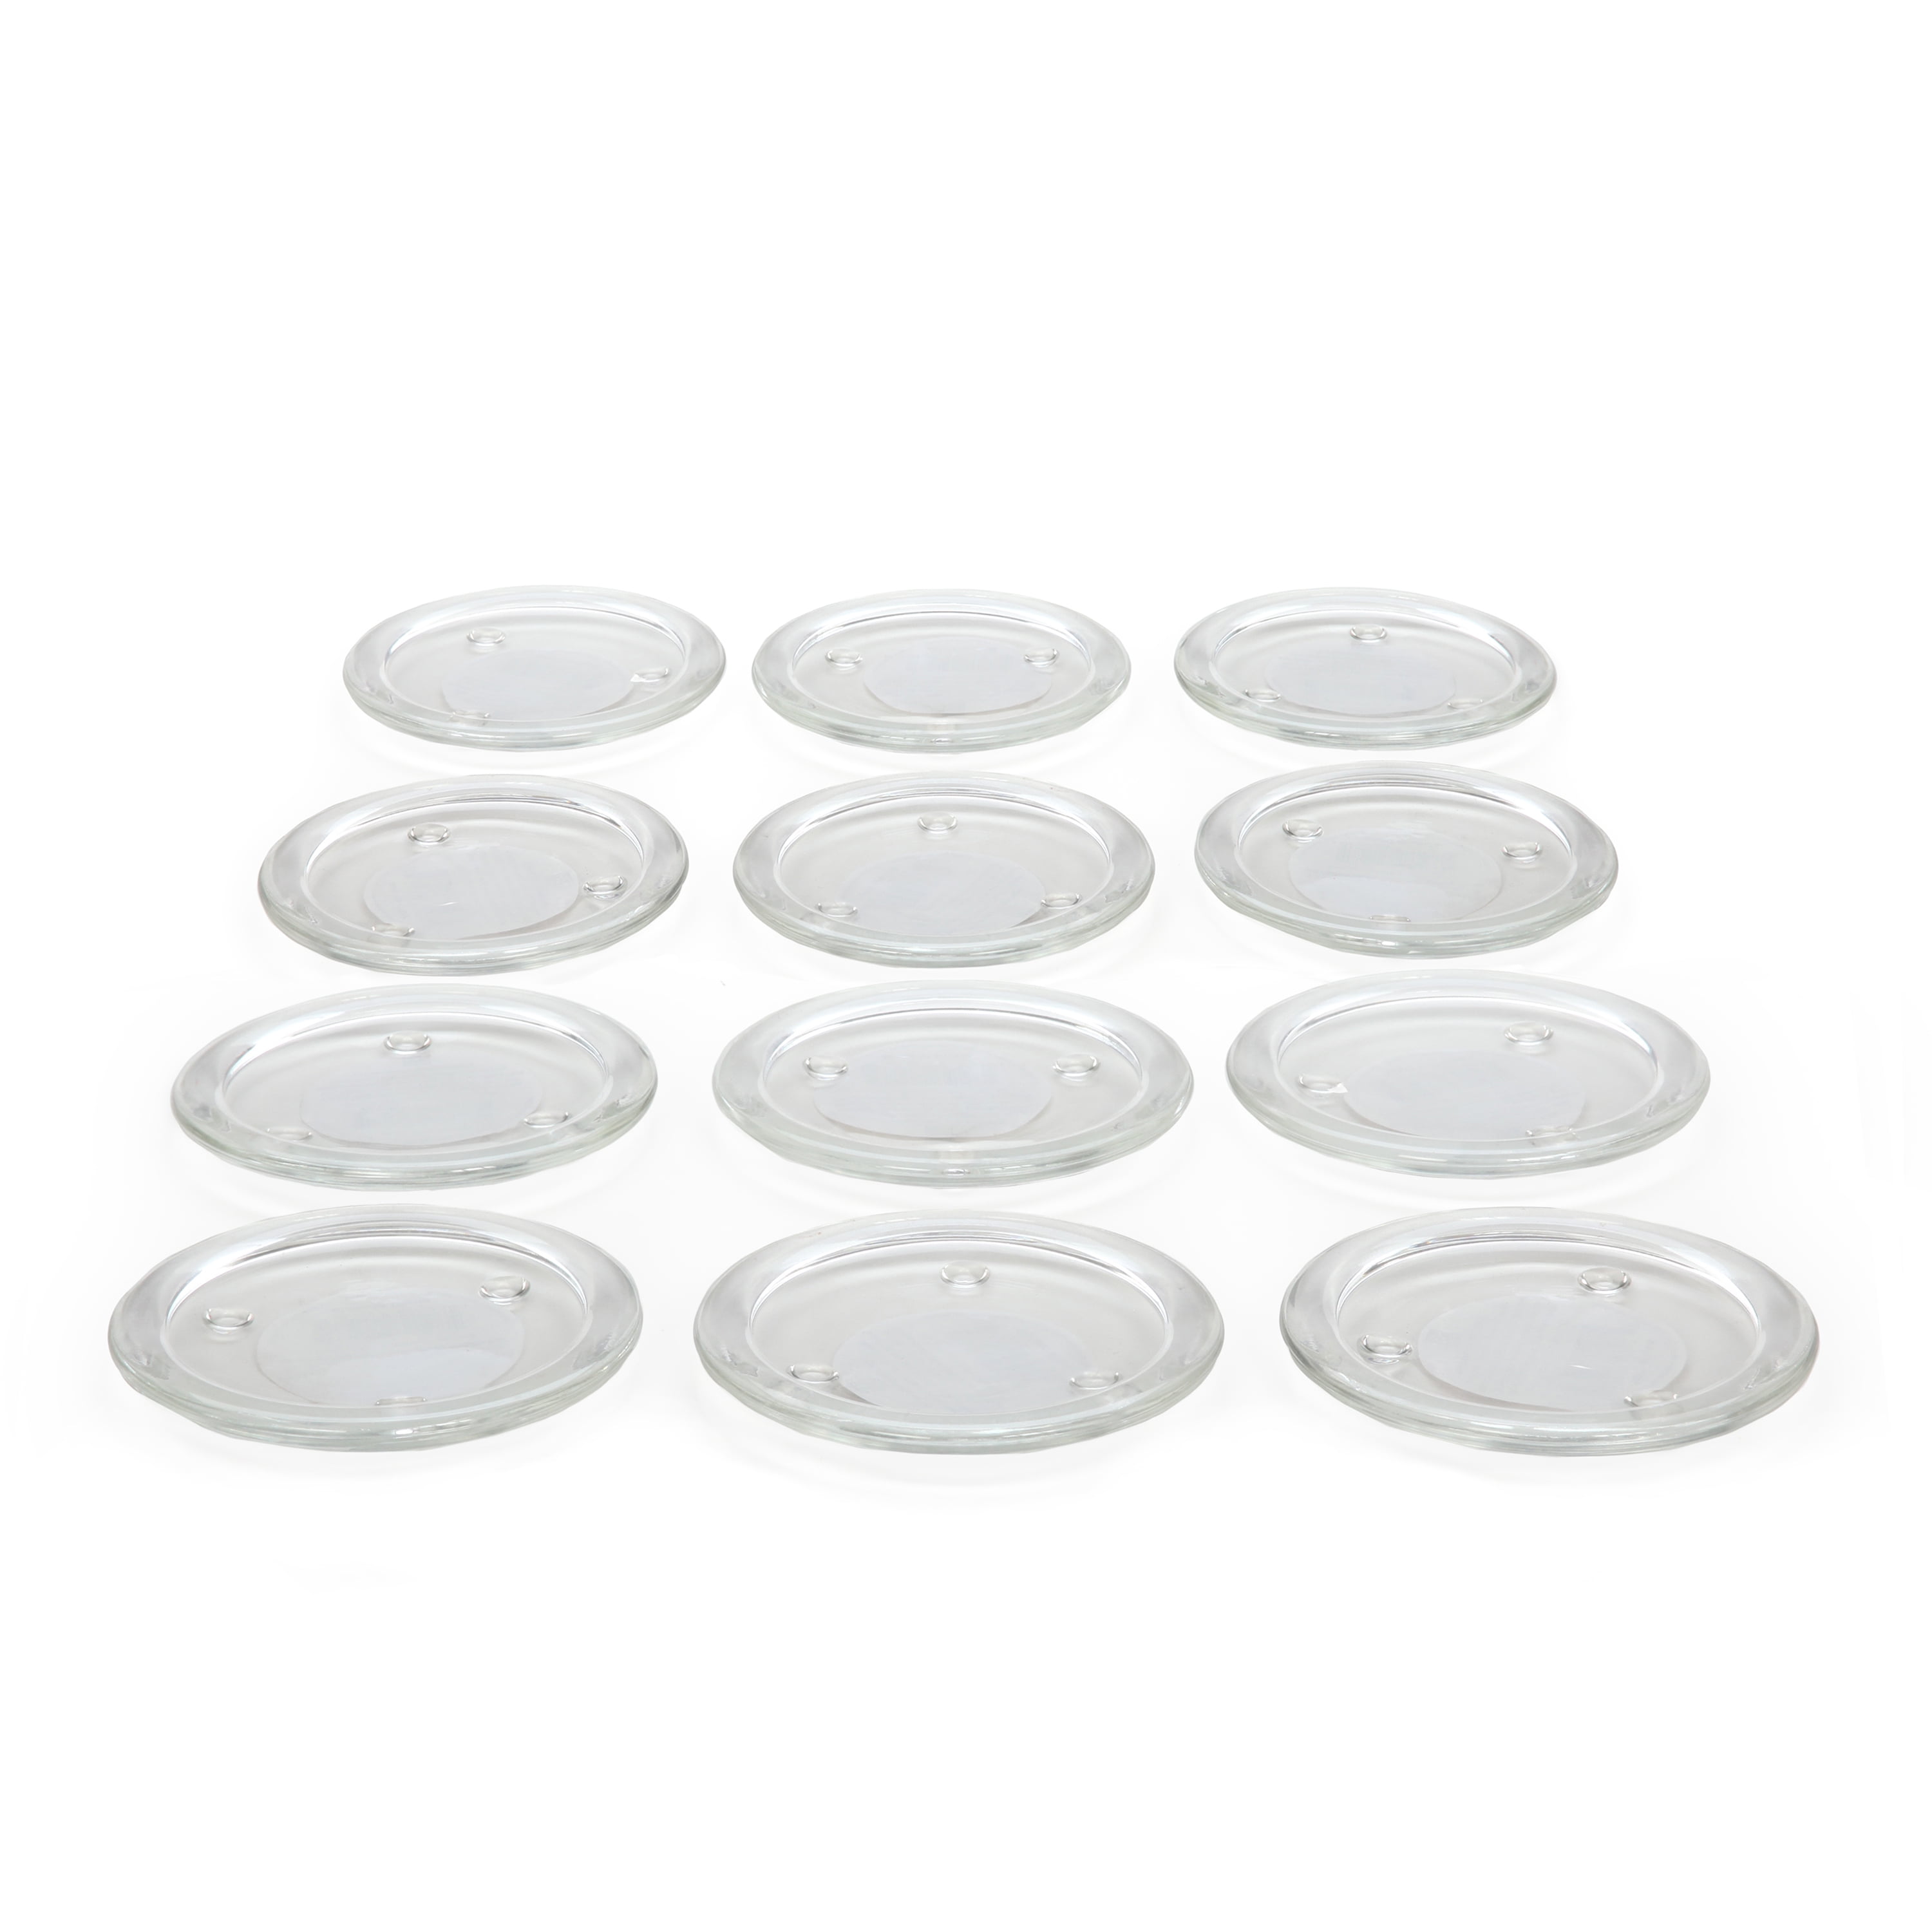 Nuptio Round Mirror Plates for Centerpiece 12 Pcs Glass Pillar Candle Holders Tray 11.81 inch 2mm Rounded Candles Plate Mirrors Centerpieces for